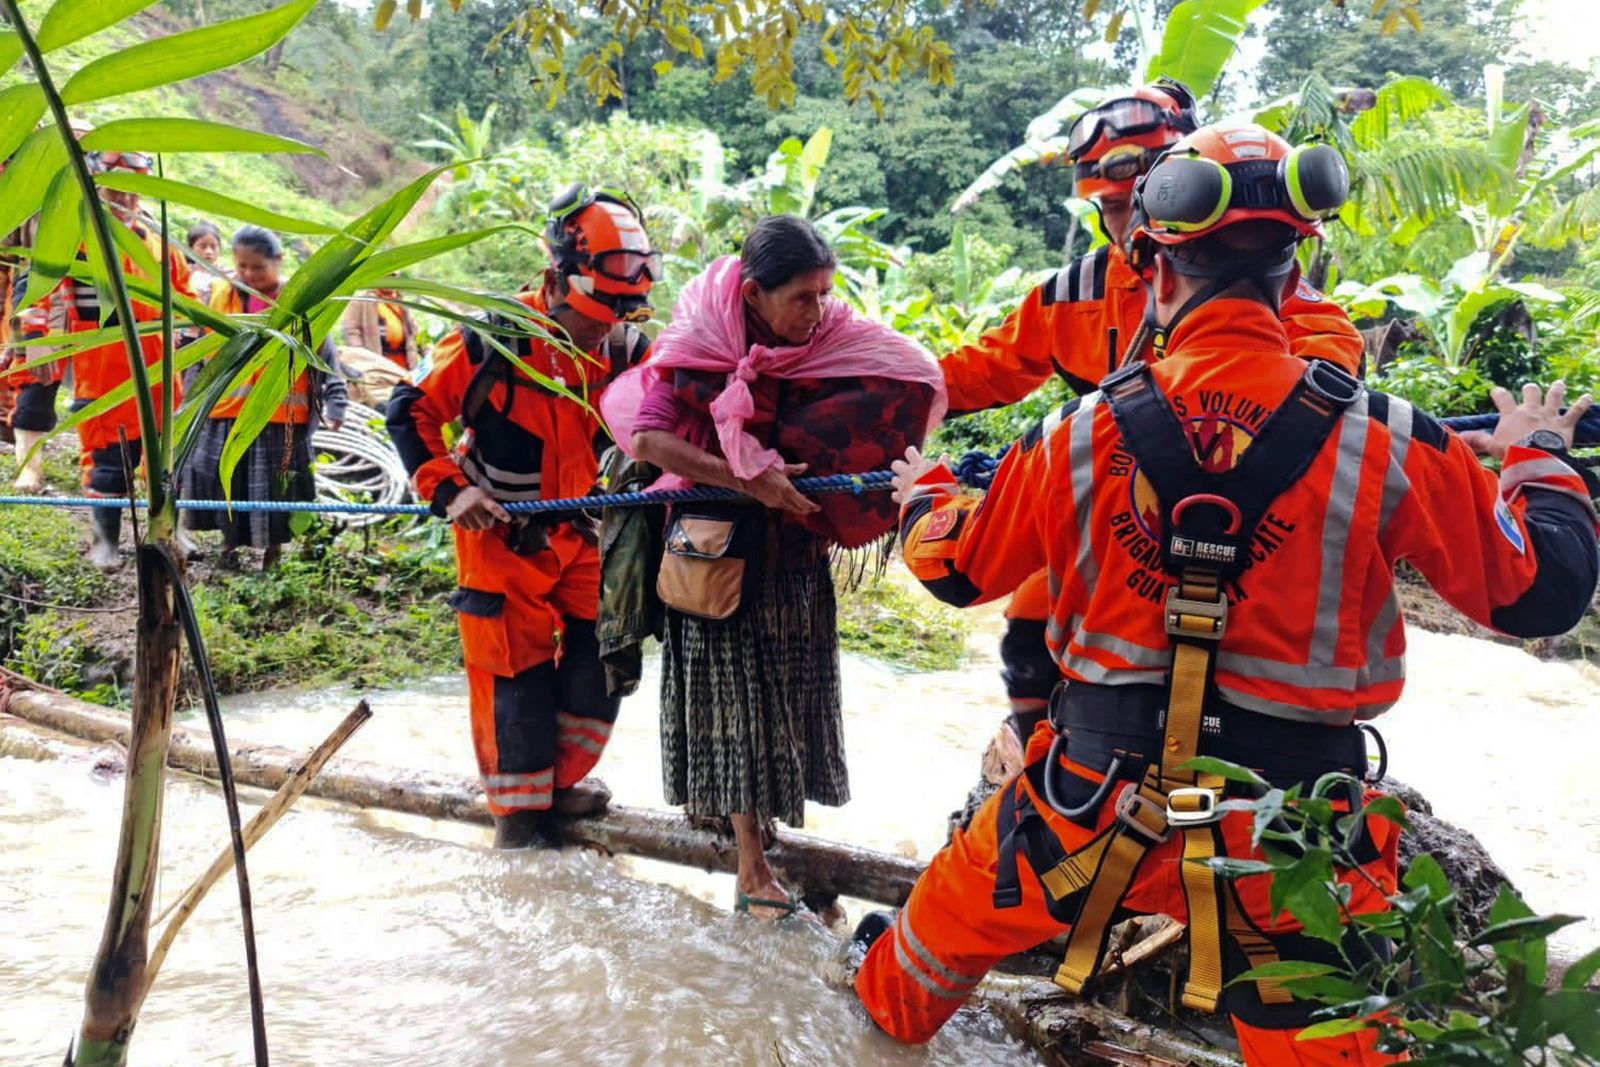 Handout picture released by Volunteer Firefighters showing their rescue patrol evacuating people after being trapped in a landslide, following the passage of Tropical Storm Julia, at Queja village, in San Cristobal Verapaz, Guatemala, on October 10, 2022. - Tropical Depression Julia dissipated Monday in western Guatemala, near Mexico, after leaving at least 11 dead and eight missing in northern Central America, as well as flooding and property damage, according to official reports. (Photo by Handout / BOMBEROS VOLUNTARIOS / AFP) / RESTRICTED TO EDITORIAL USE - MANDATORY CREDIT 